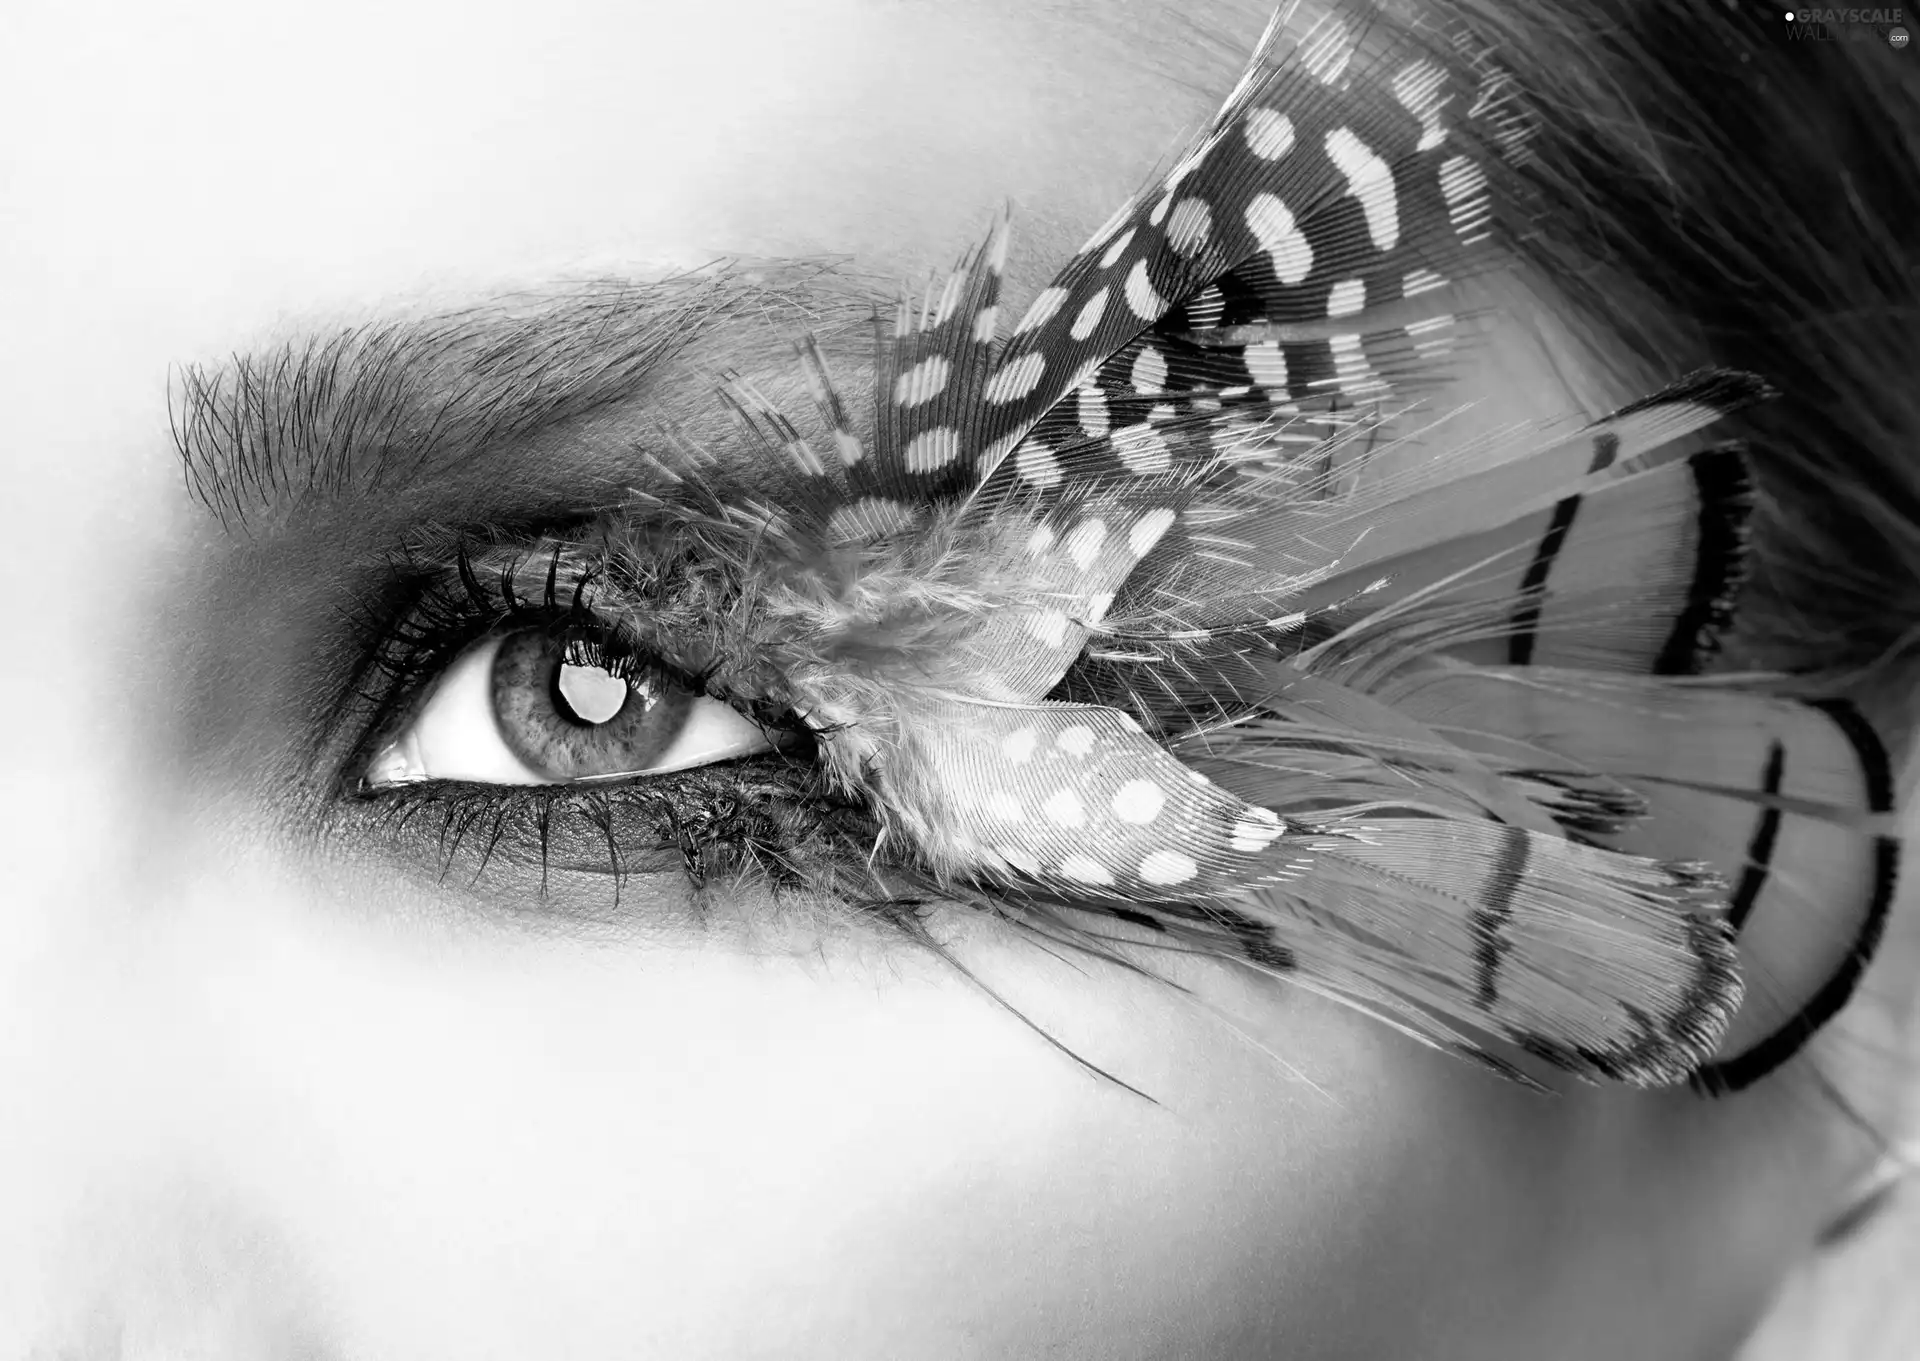 eye, color, make-up, feather